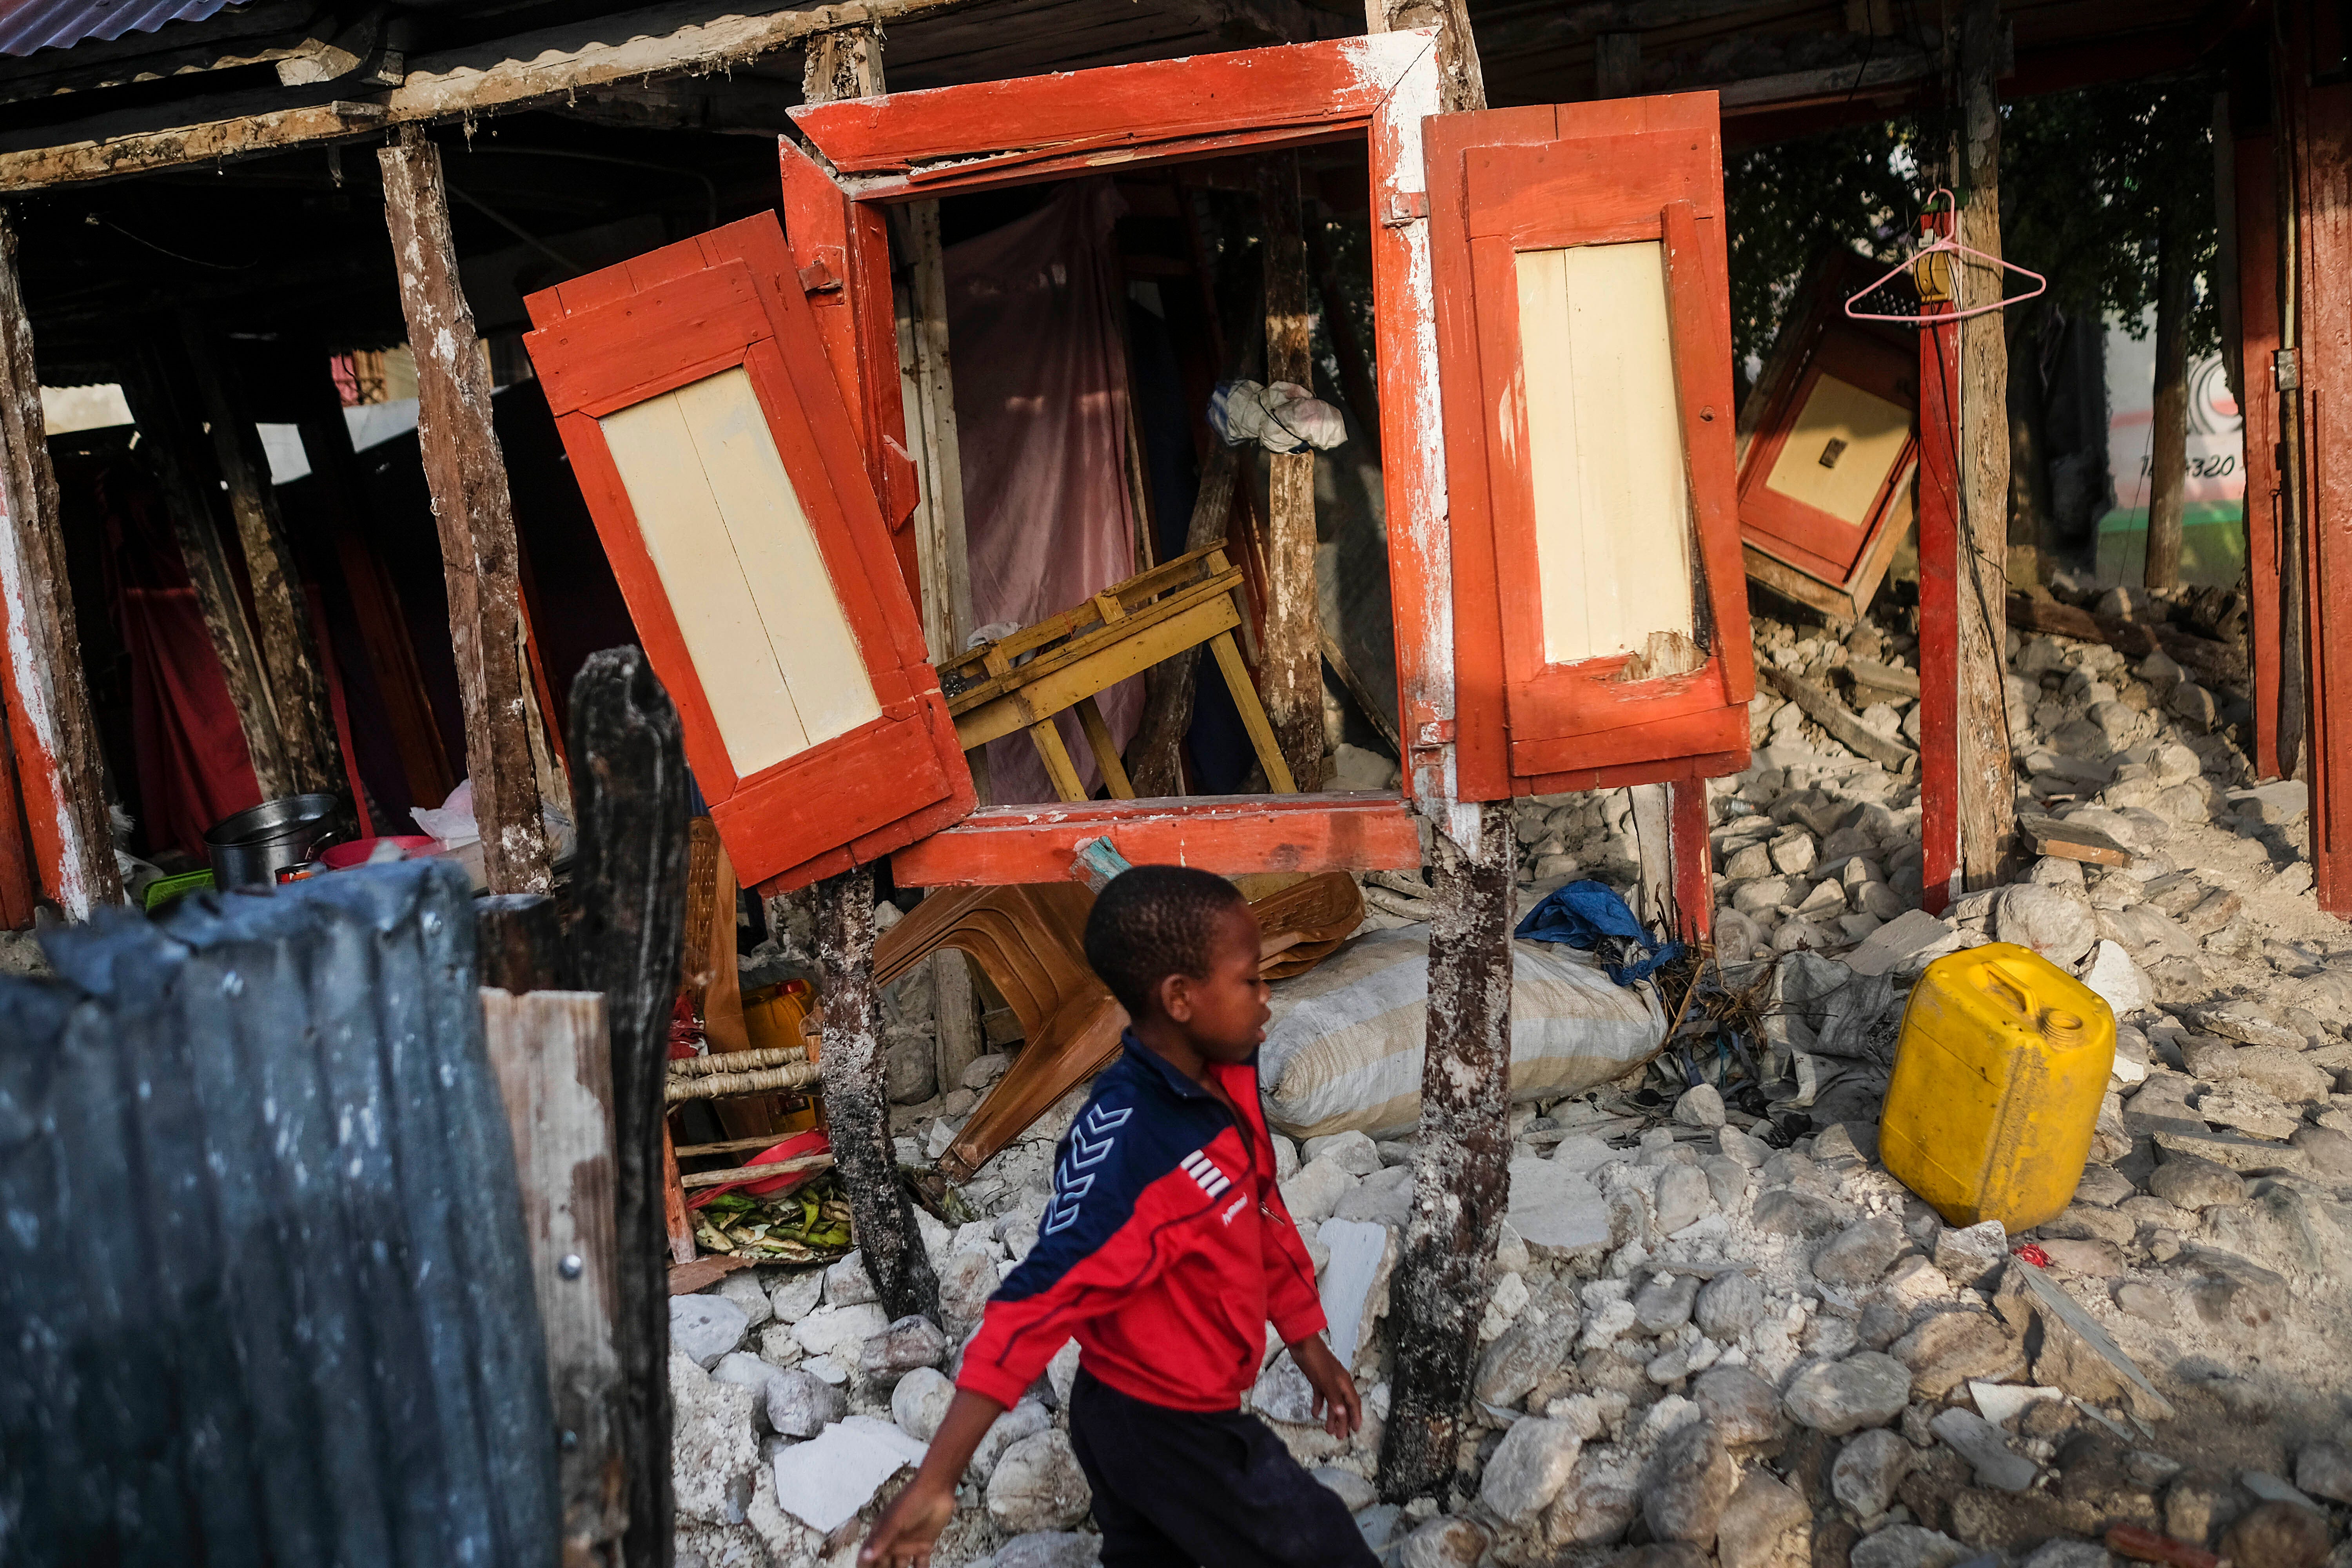 A boy walks past his home destroyed by the 7.2 magnitude earthquake, in Maniche, Haiti on Aug. 24, 2021.